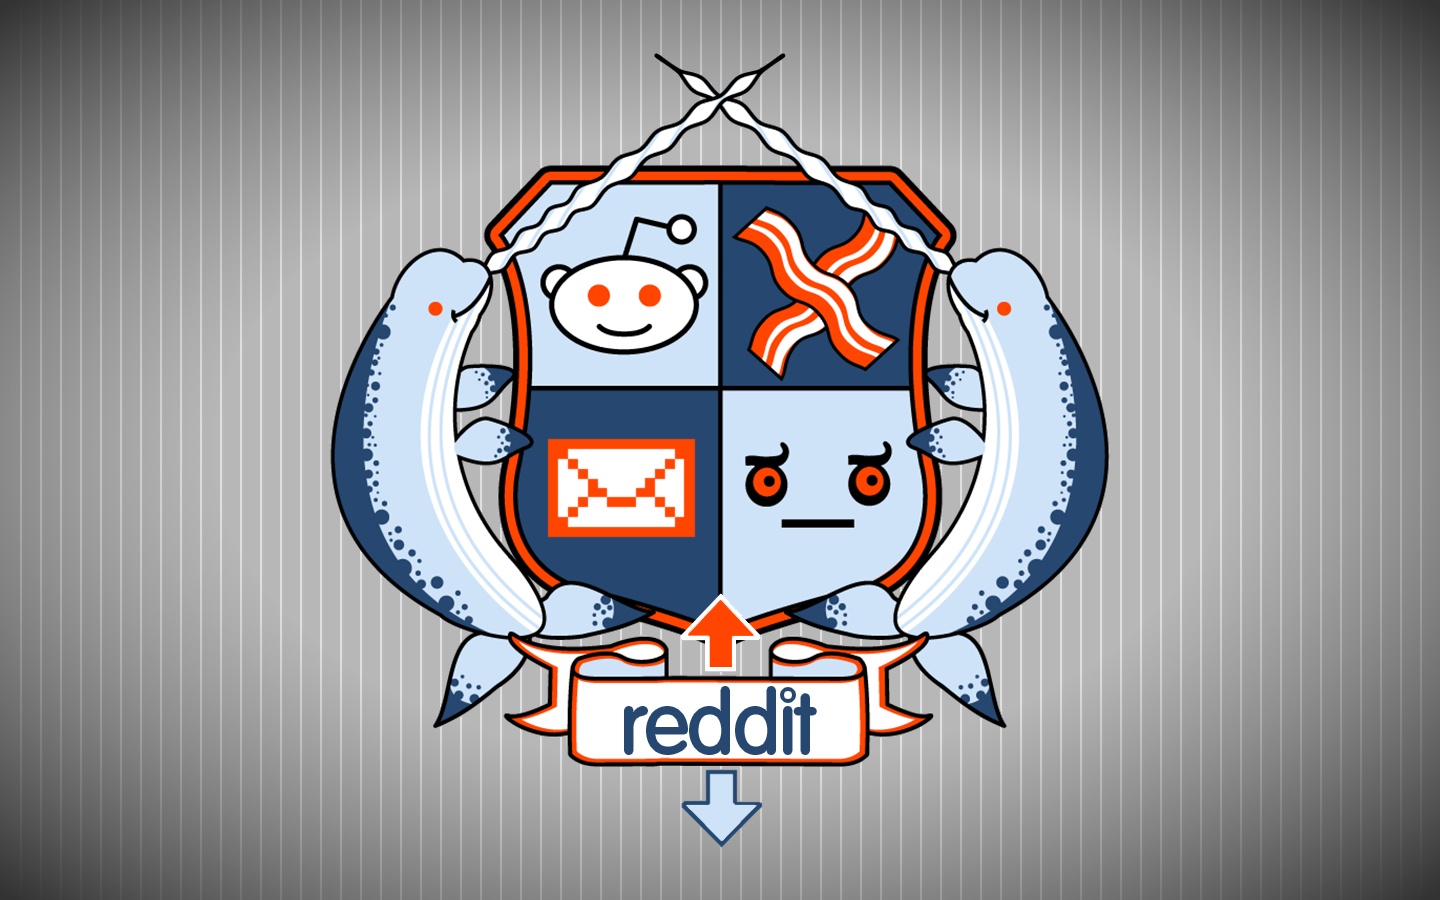 Someone created a reddit Coat of Arms and it featured both narwhals